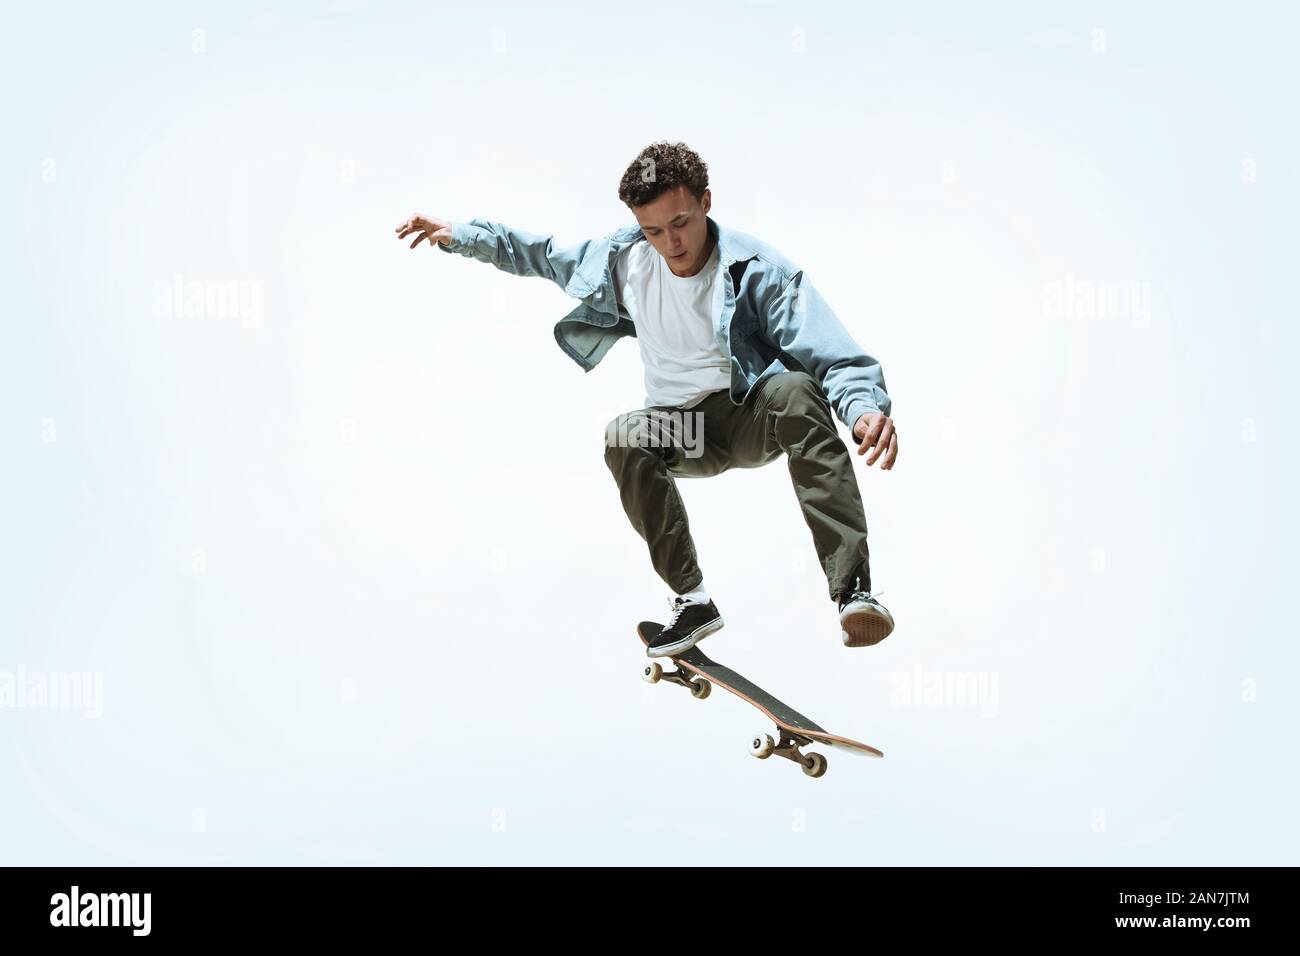 Caucasian young skateboarder riding isolated on a white studio background. Man in casual clothing training, jumping, practicing in motion. Concept of hobby, healthy lifestyle, youth, action, movement. Stock Photo